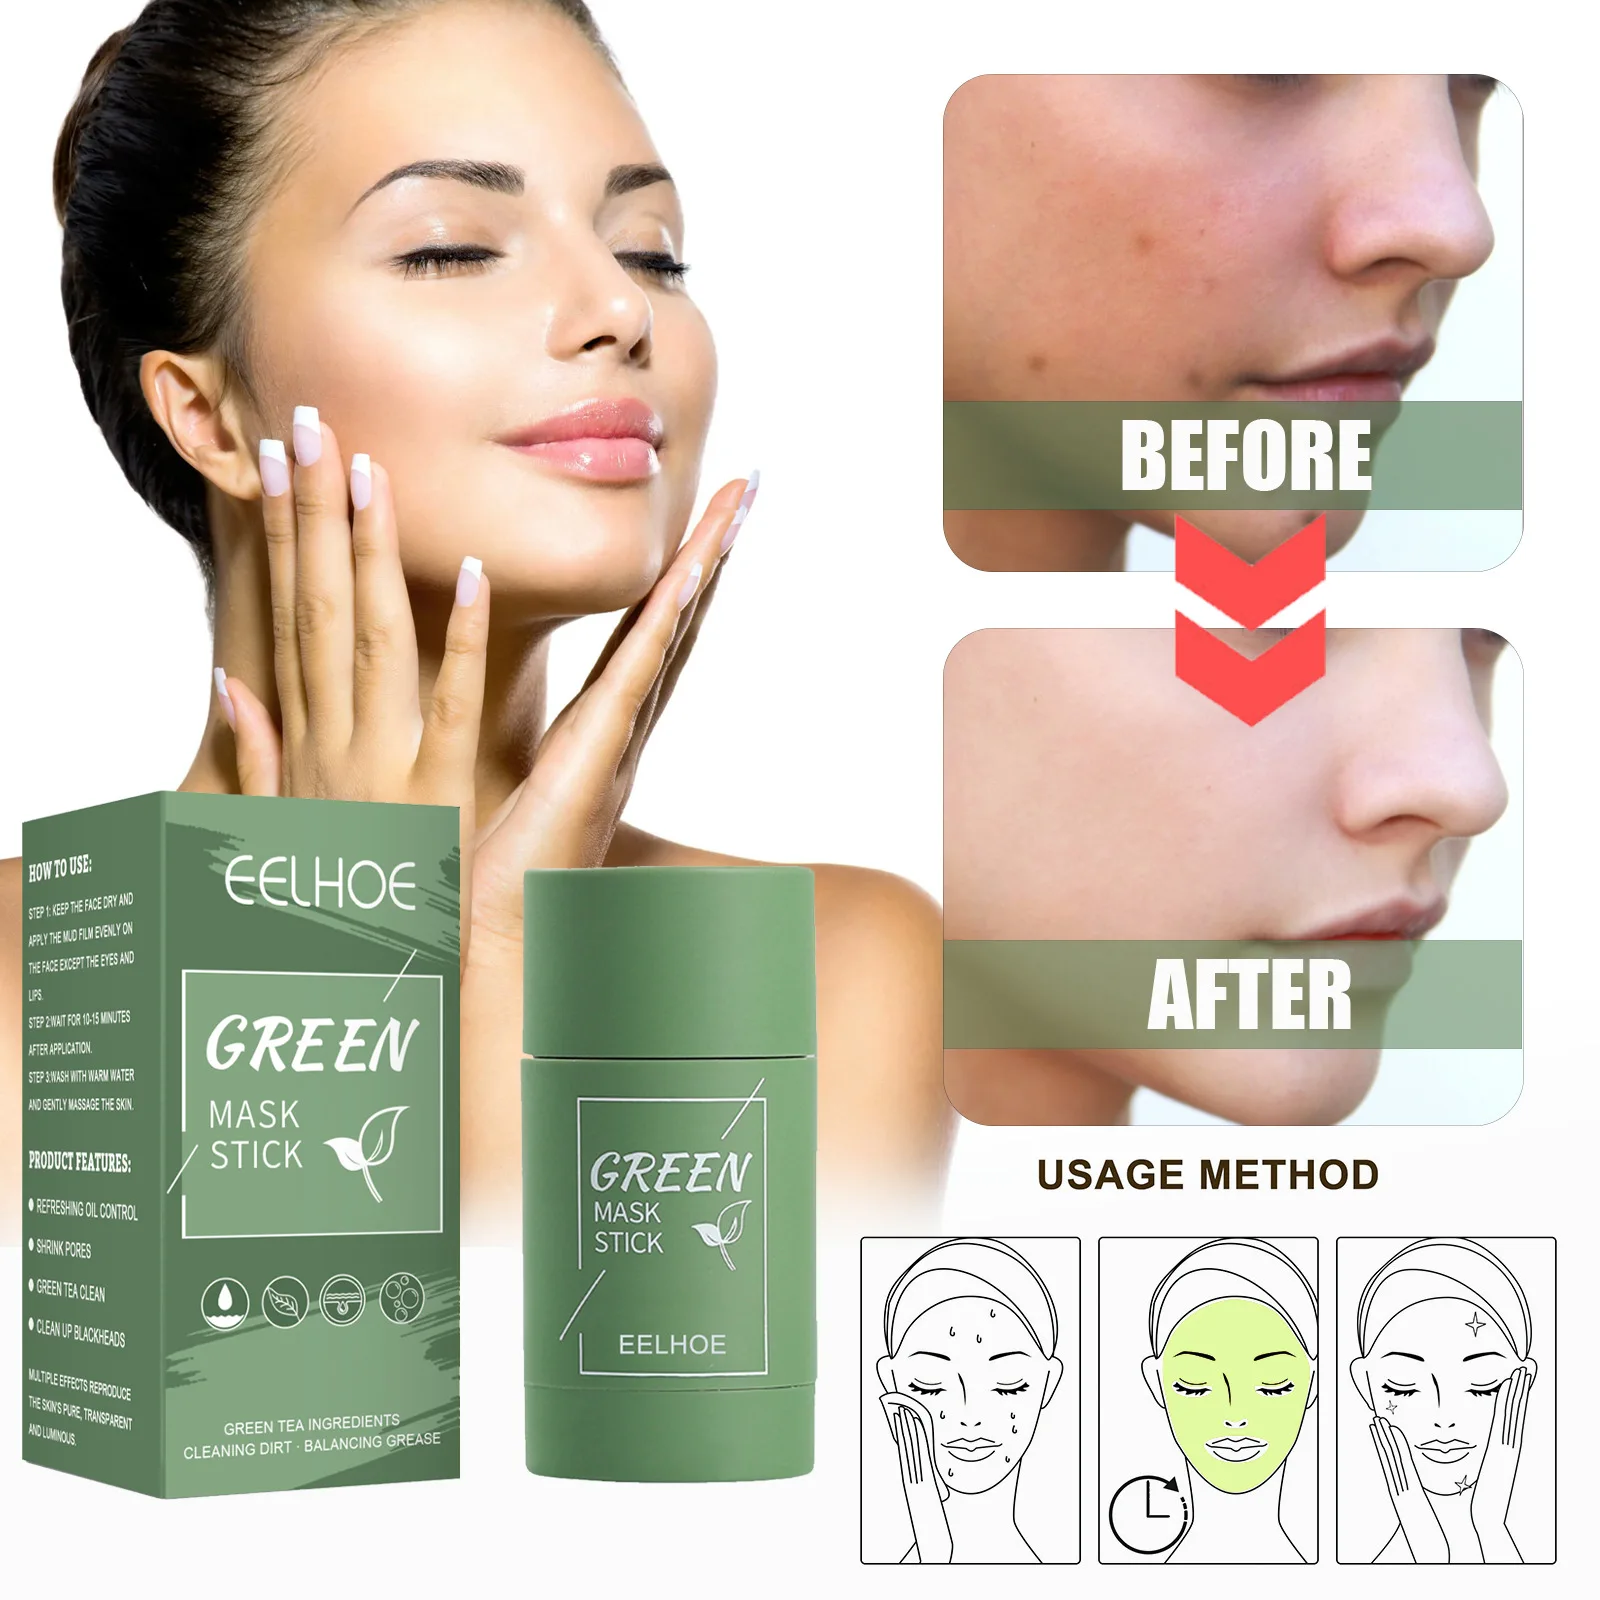 

EELHOE Green Tea Solid Facial Mask Deep Cleaning And Moisturizing Facial Mask Stick Pore Shrinking Smearing Mud Film Stick